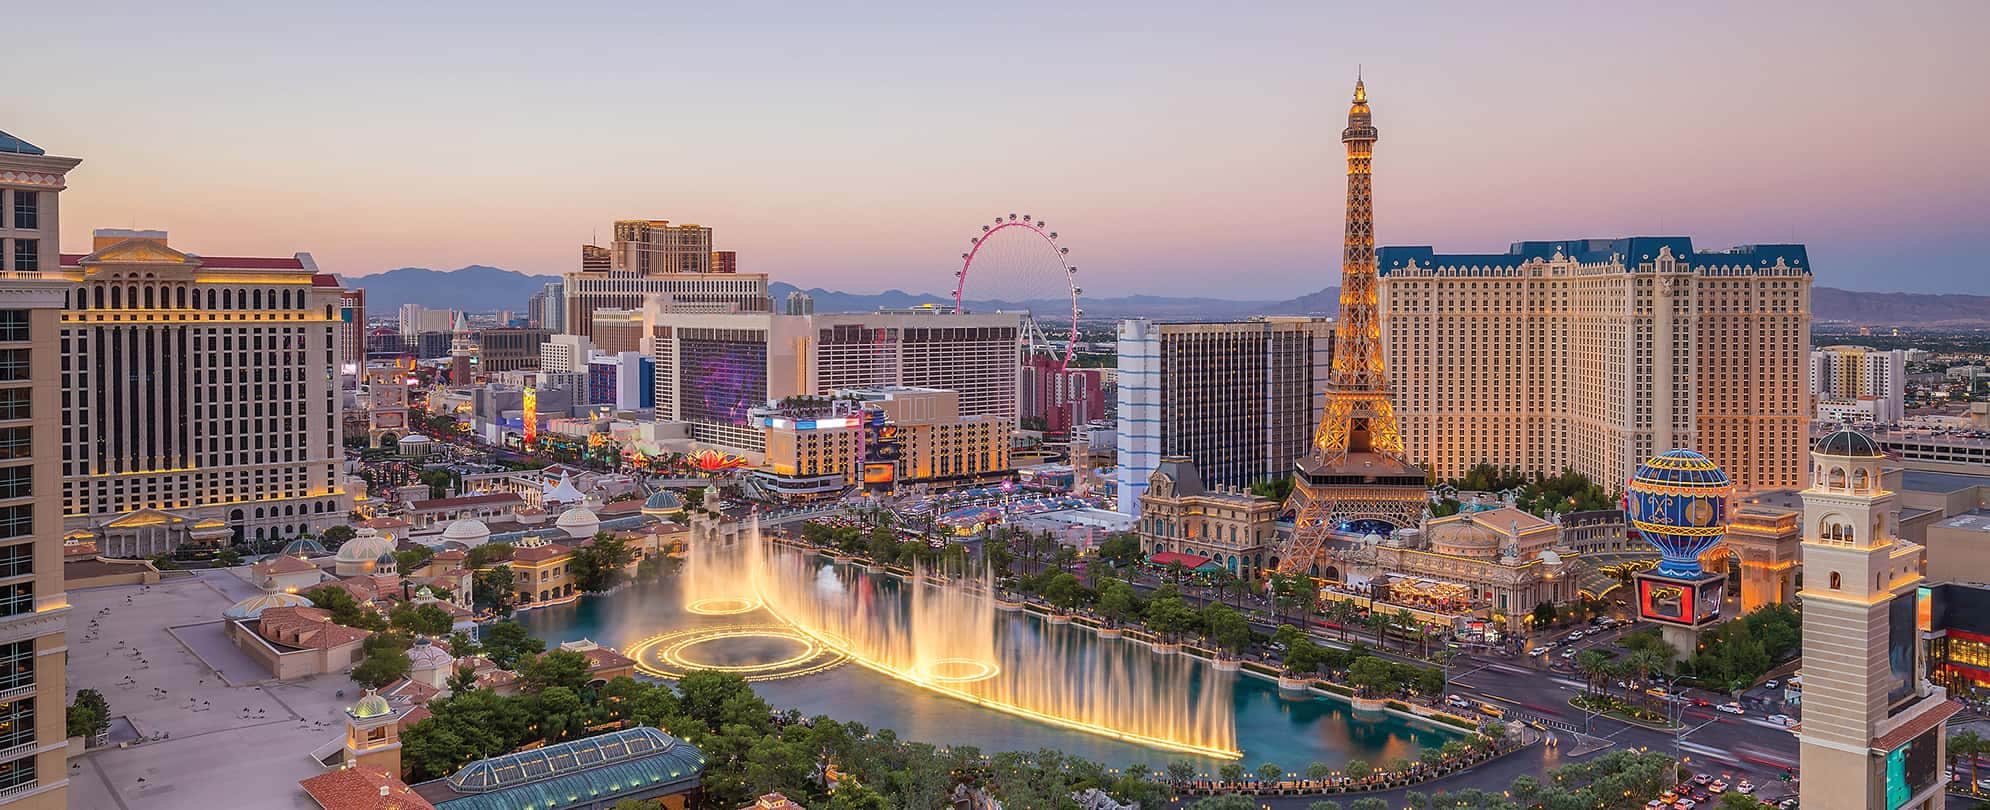 The Fountains at Bellagio and the Las Vegas Strip, lit up at sunset.